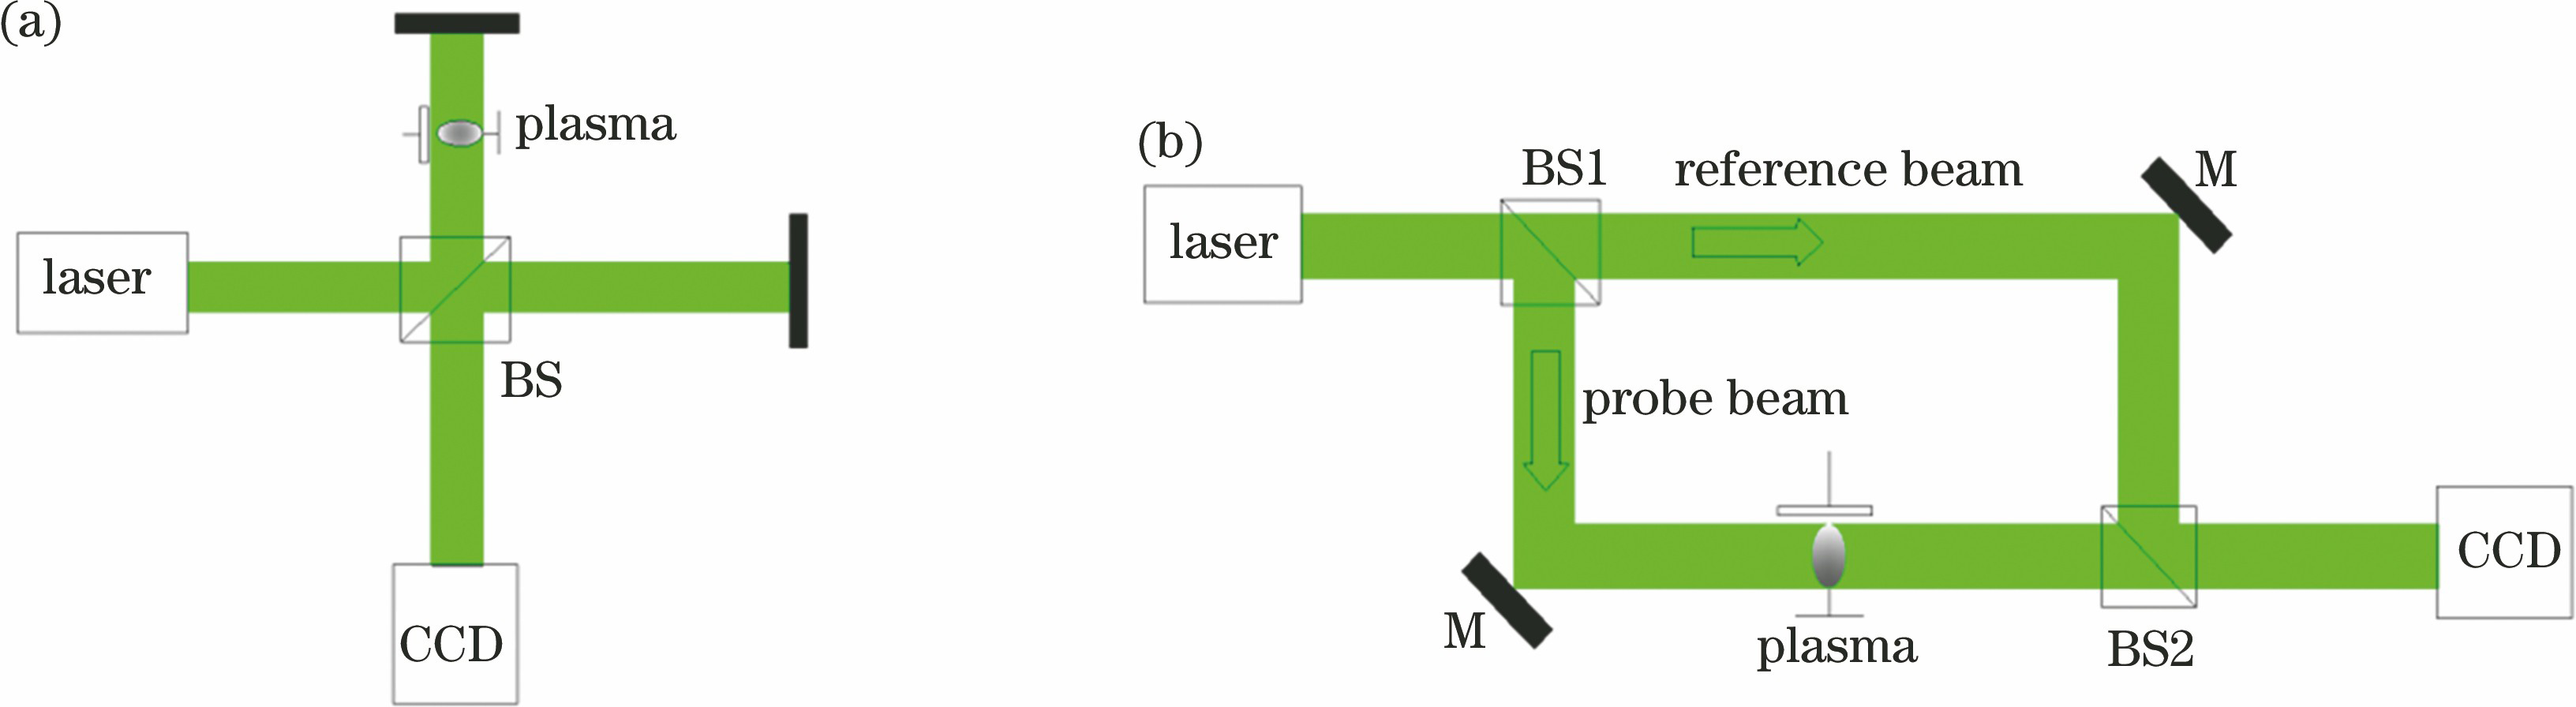 Optical paths of interferometers. (a) Michelson-Morley interferometer; (b) Mach-Zehnder interferometer